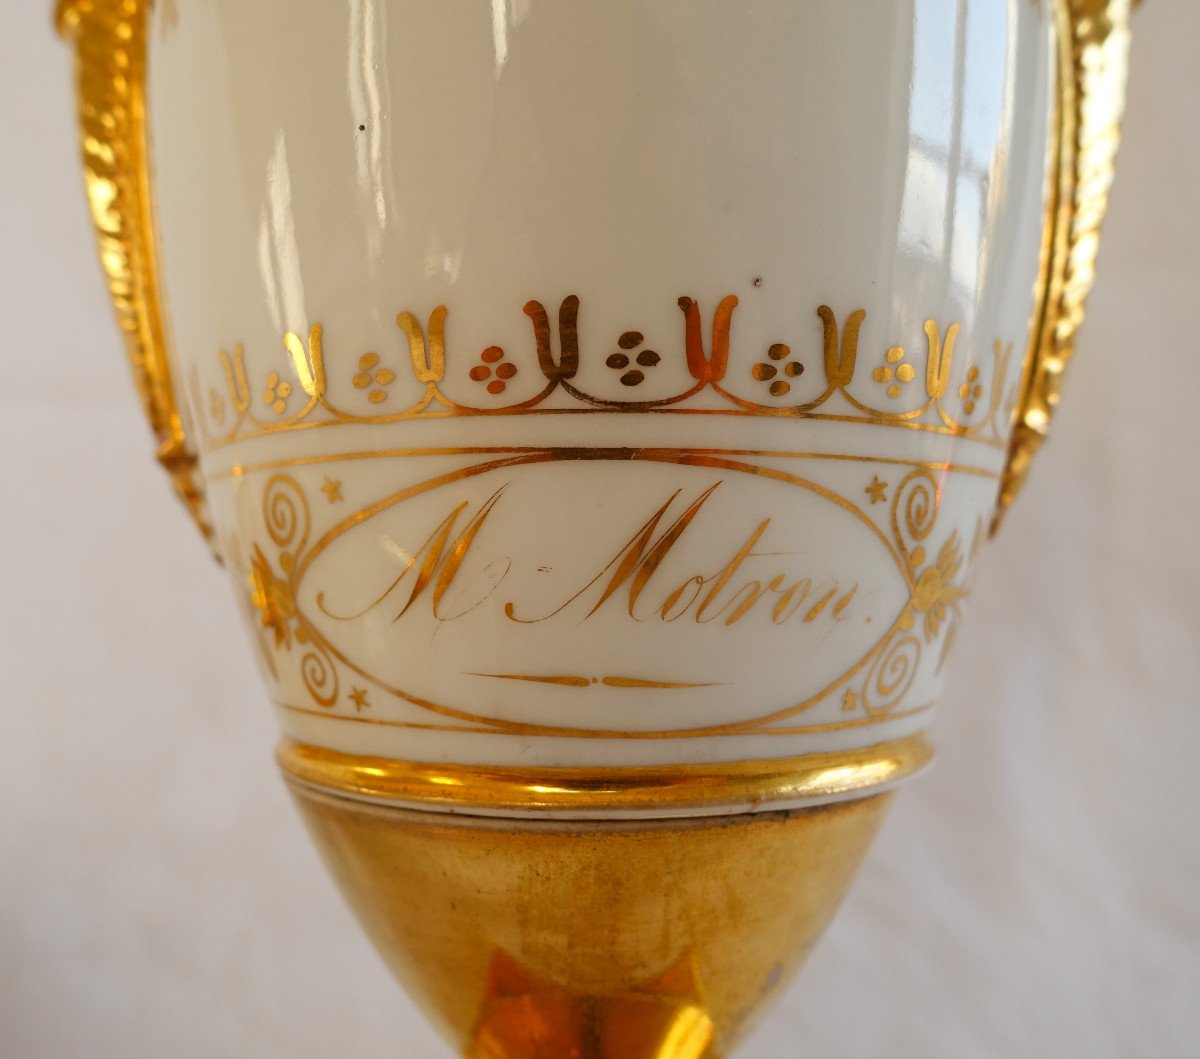 Pair Of Empire Paris Porcelain Vases Enhanced With Fine Gold, Early 19th Century-photo-2